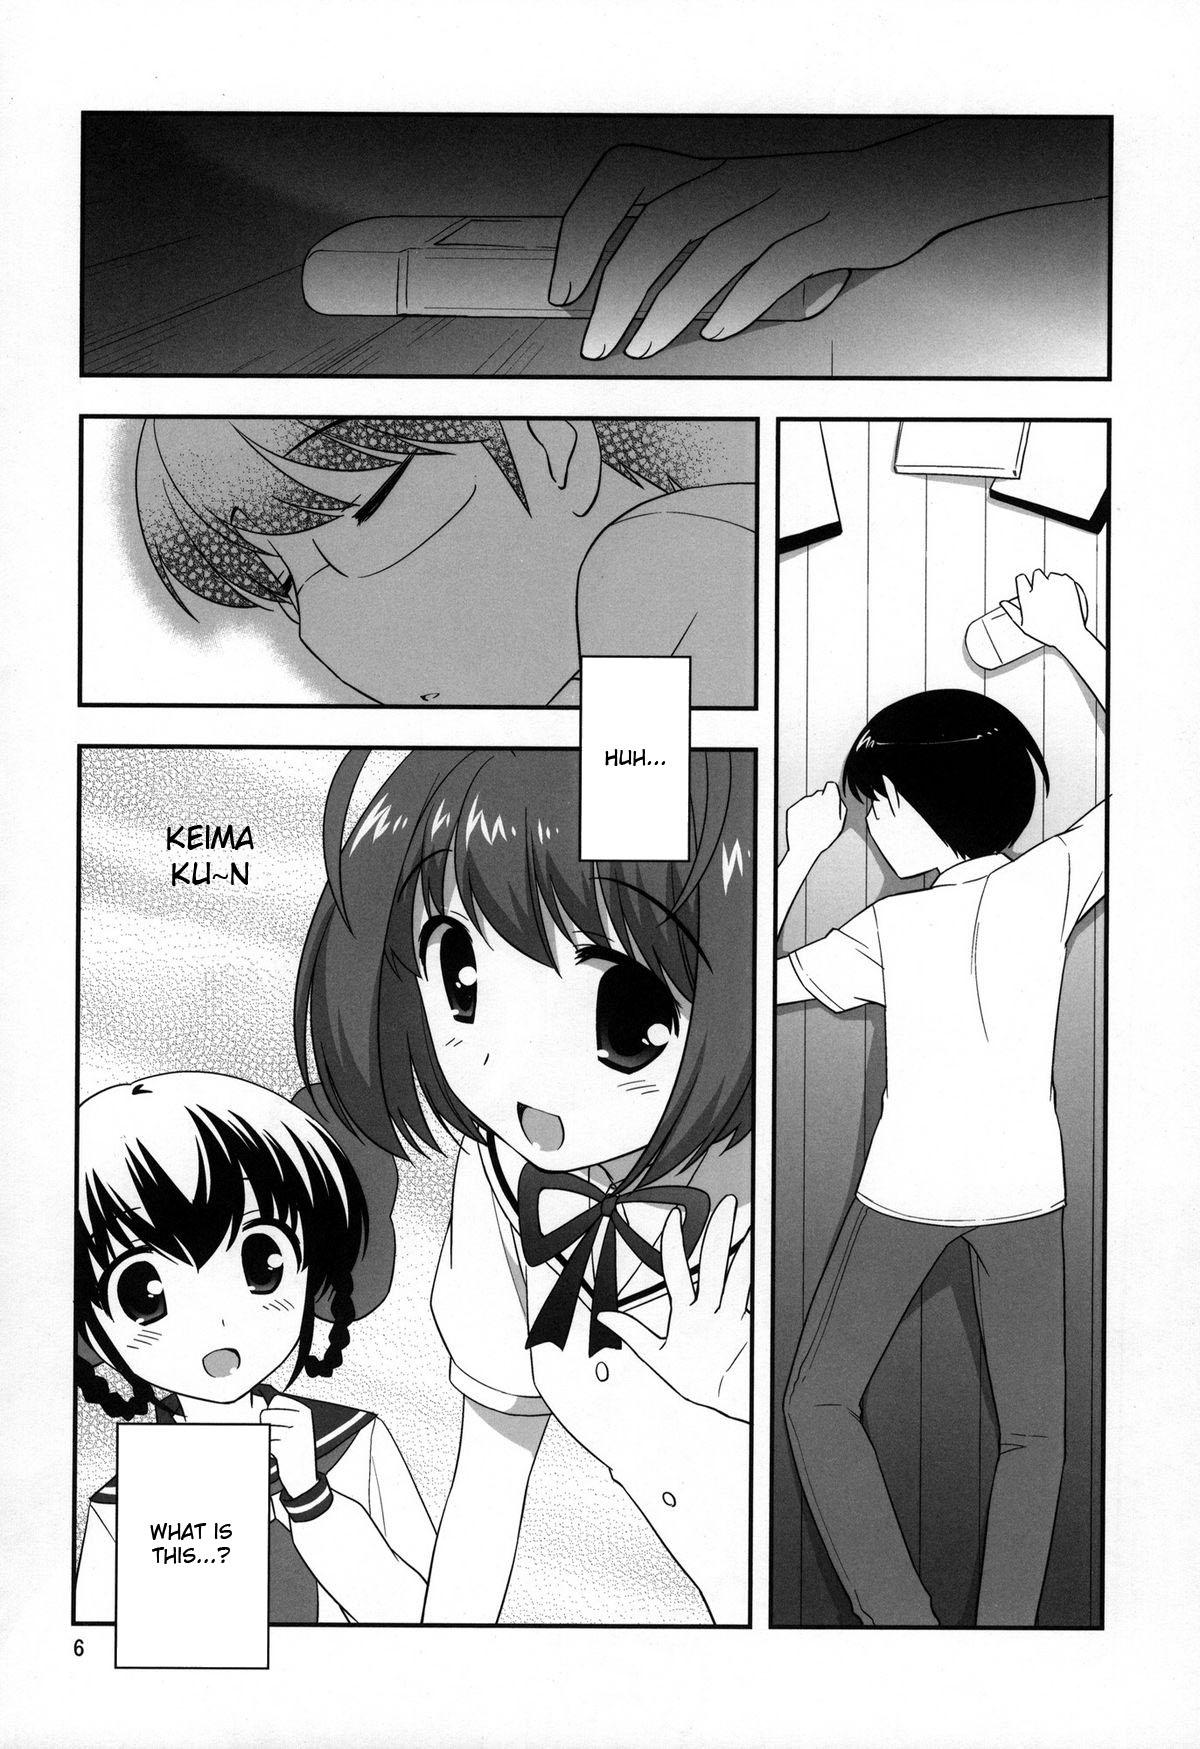 Amatuer Yokkyuuuuun! - The world god only knows Fetish - Page 5